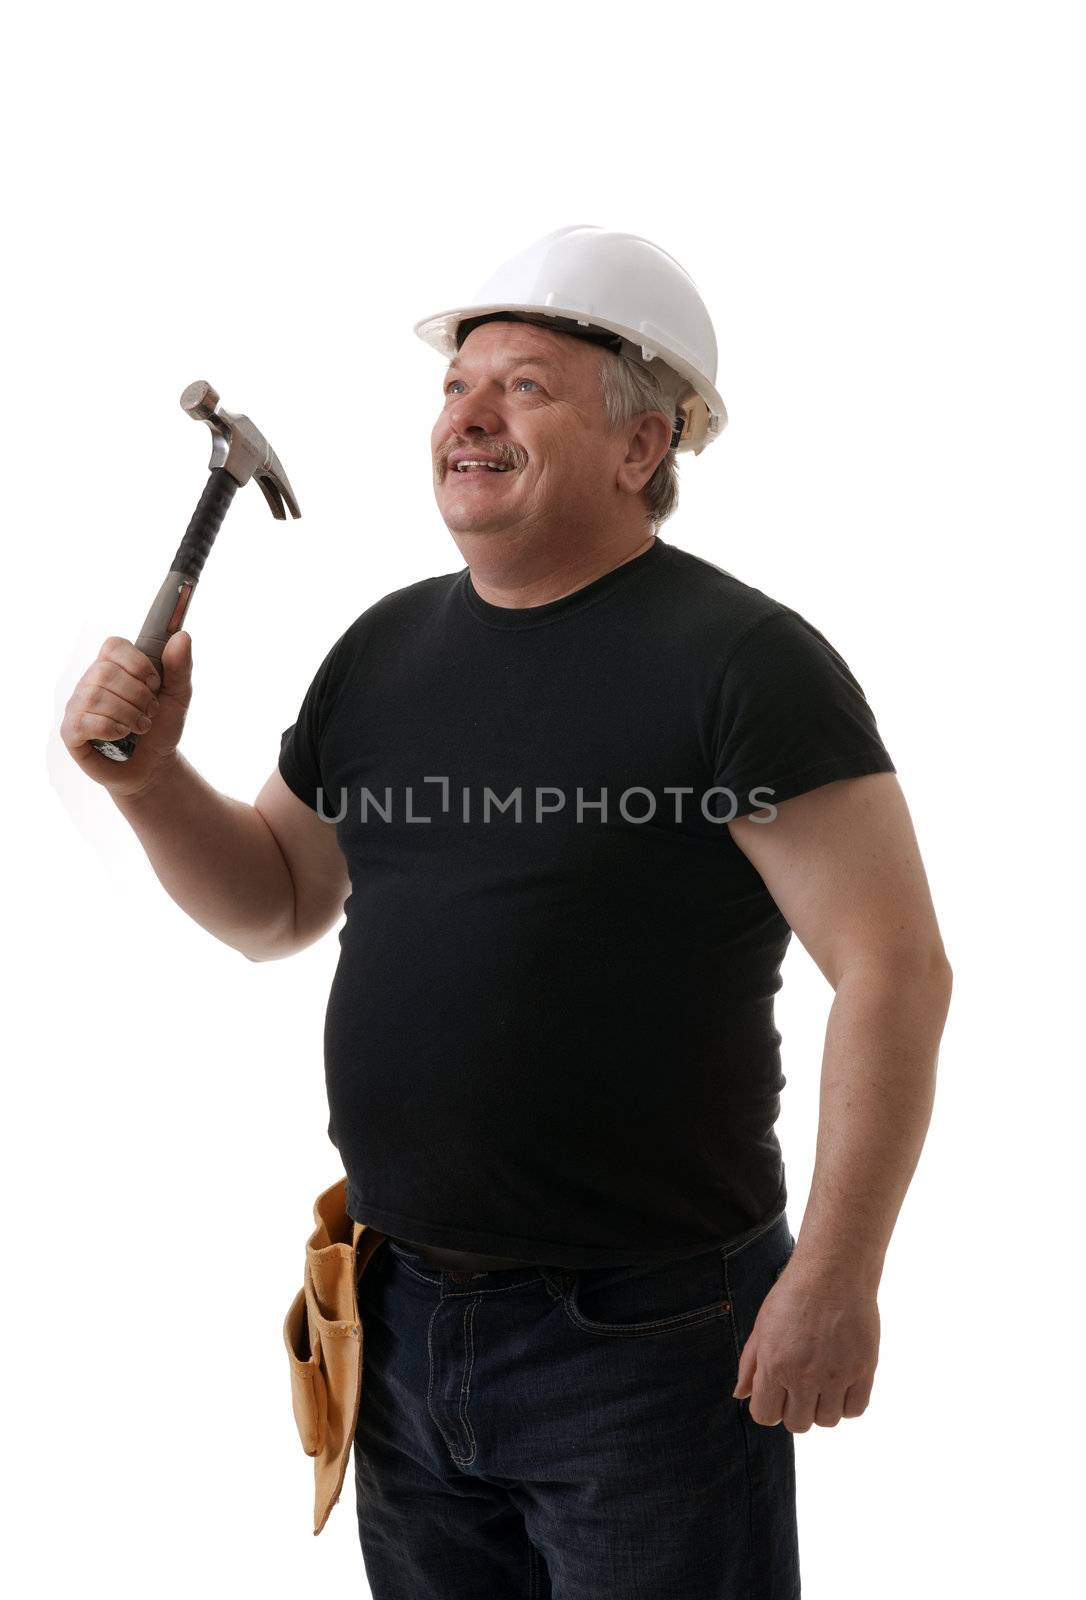 Tradesman holding the hammer portrait on white background